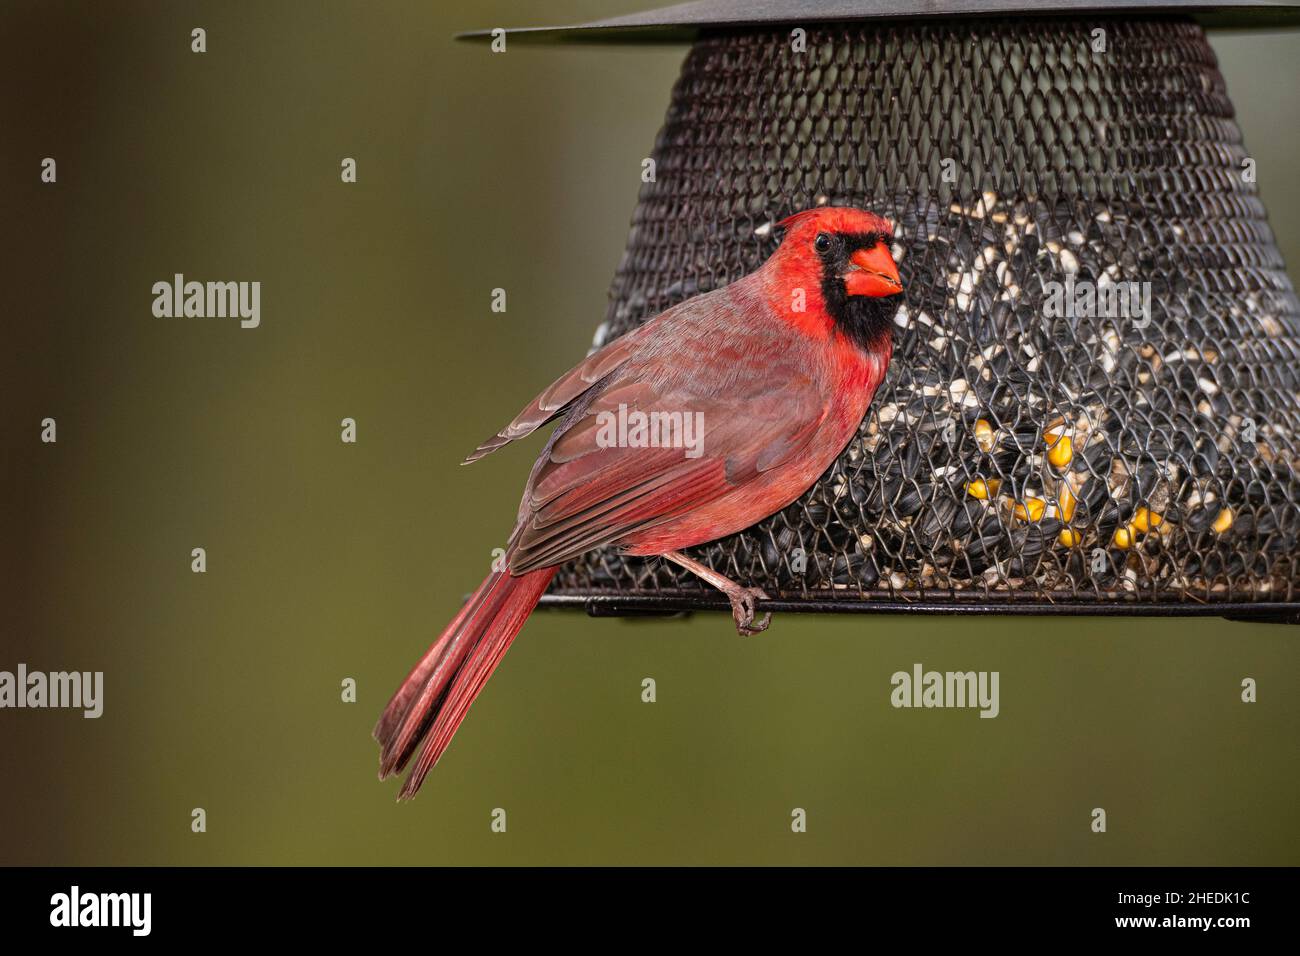 Male Northern Cardinal perched on seed feeder. Stock Photo